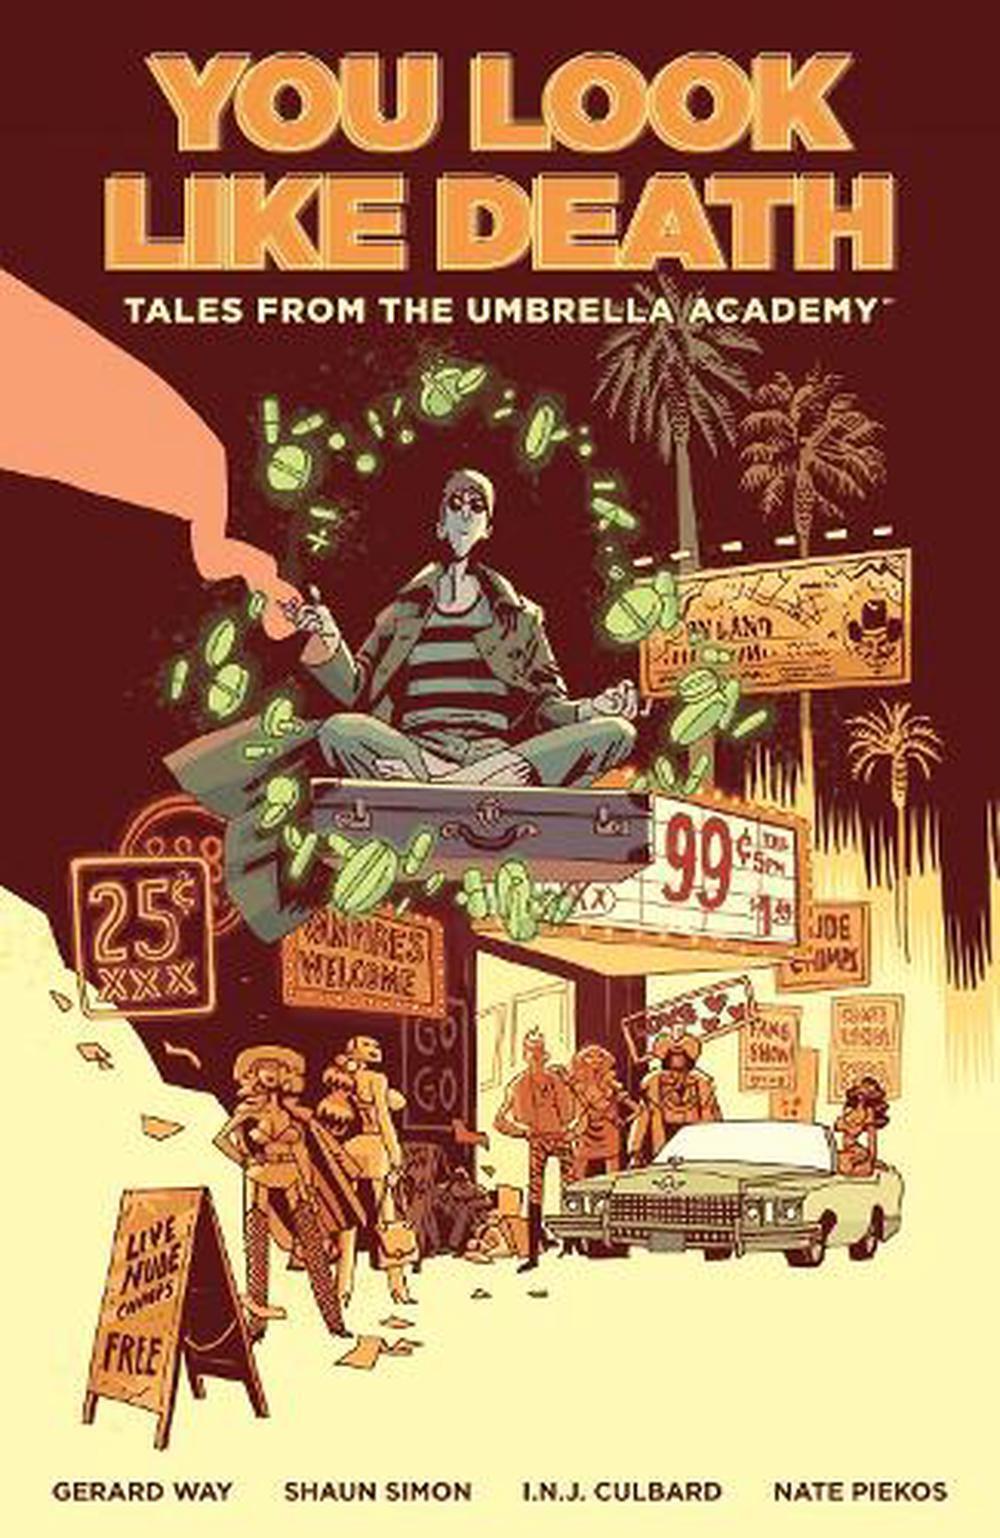 Tales from the Umbrella Academy: You Look Like Death Vol. 1 by Gerard Way (Engli